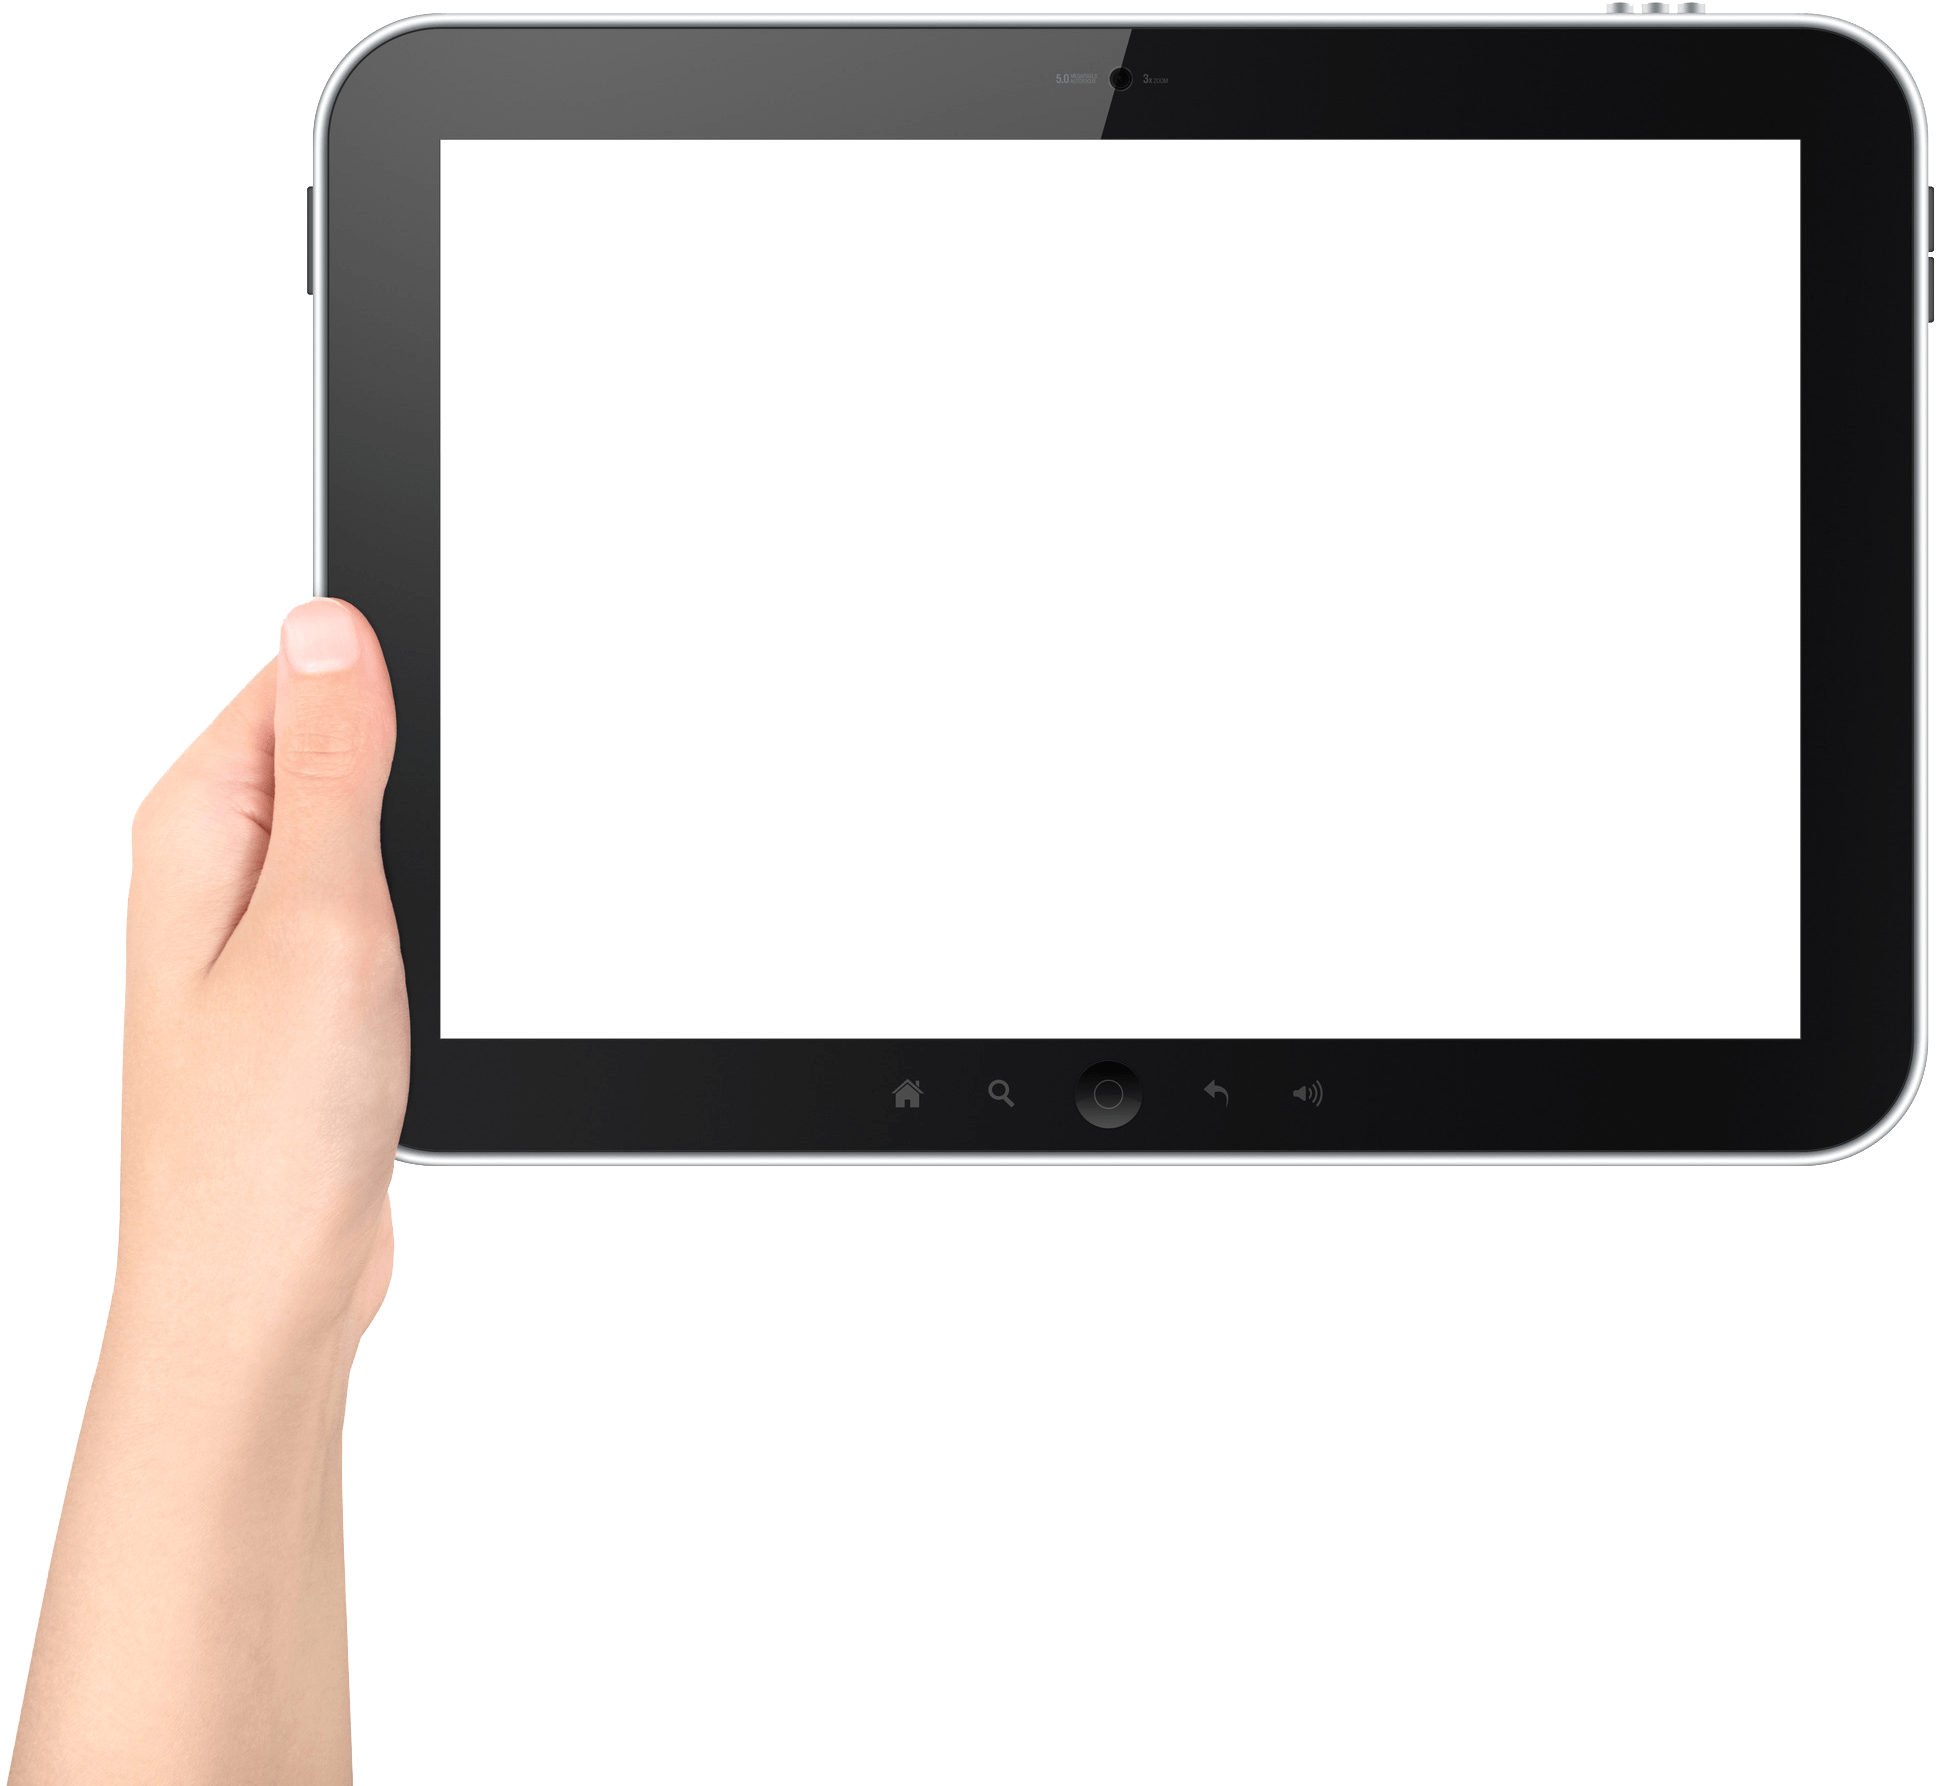 Clipart hand computer. Holding ipad tablet transparent